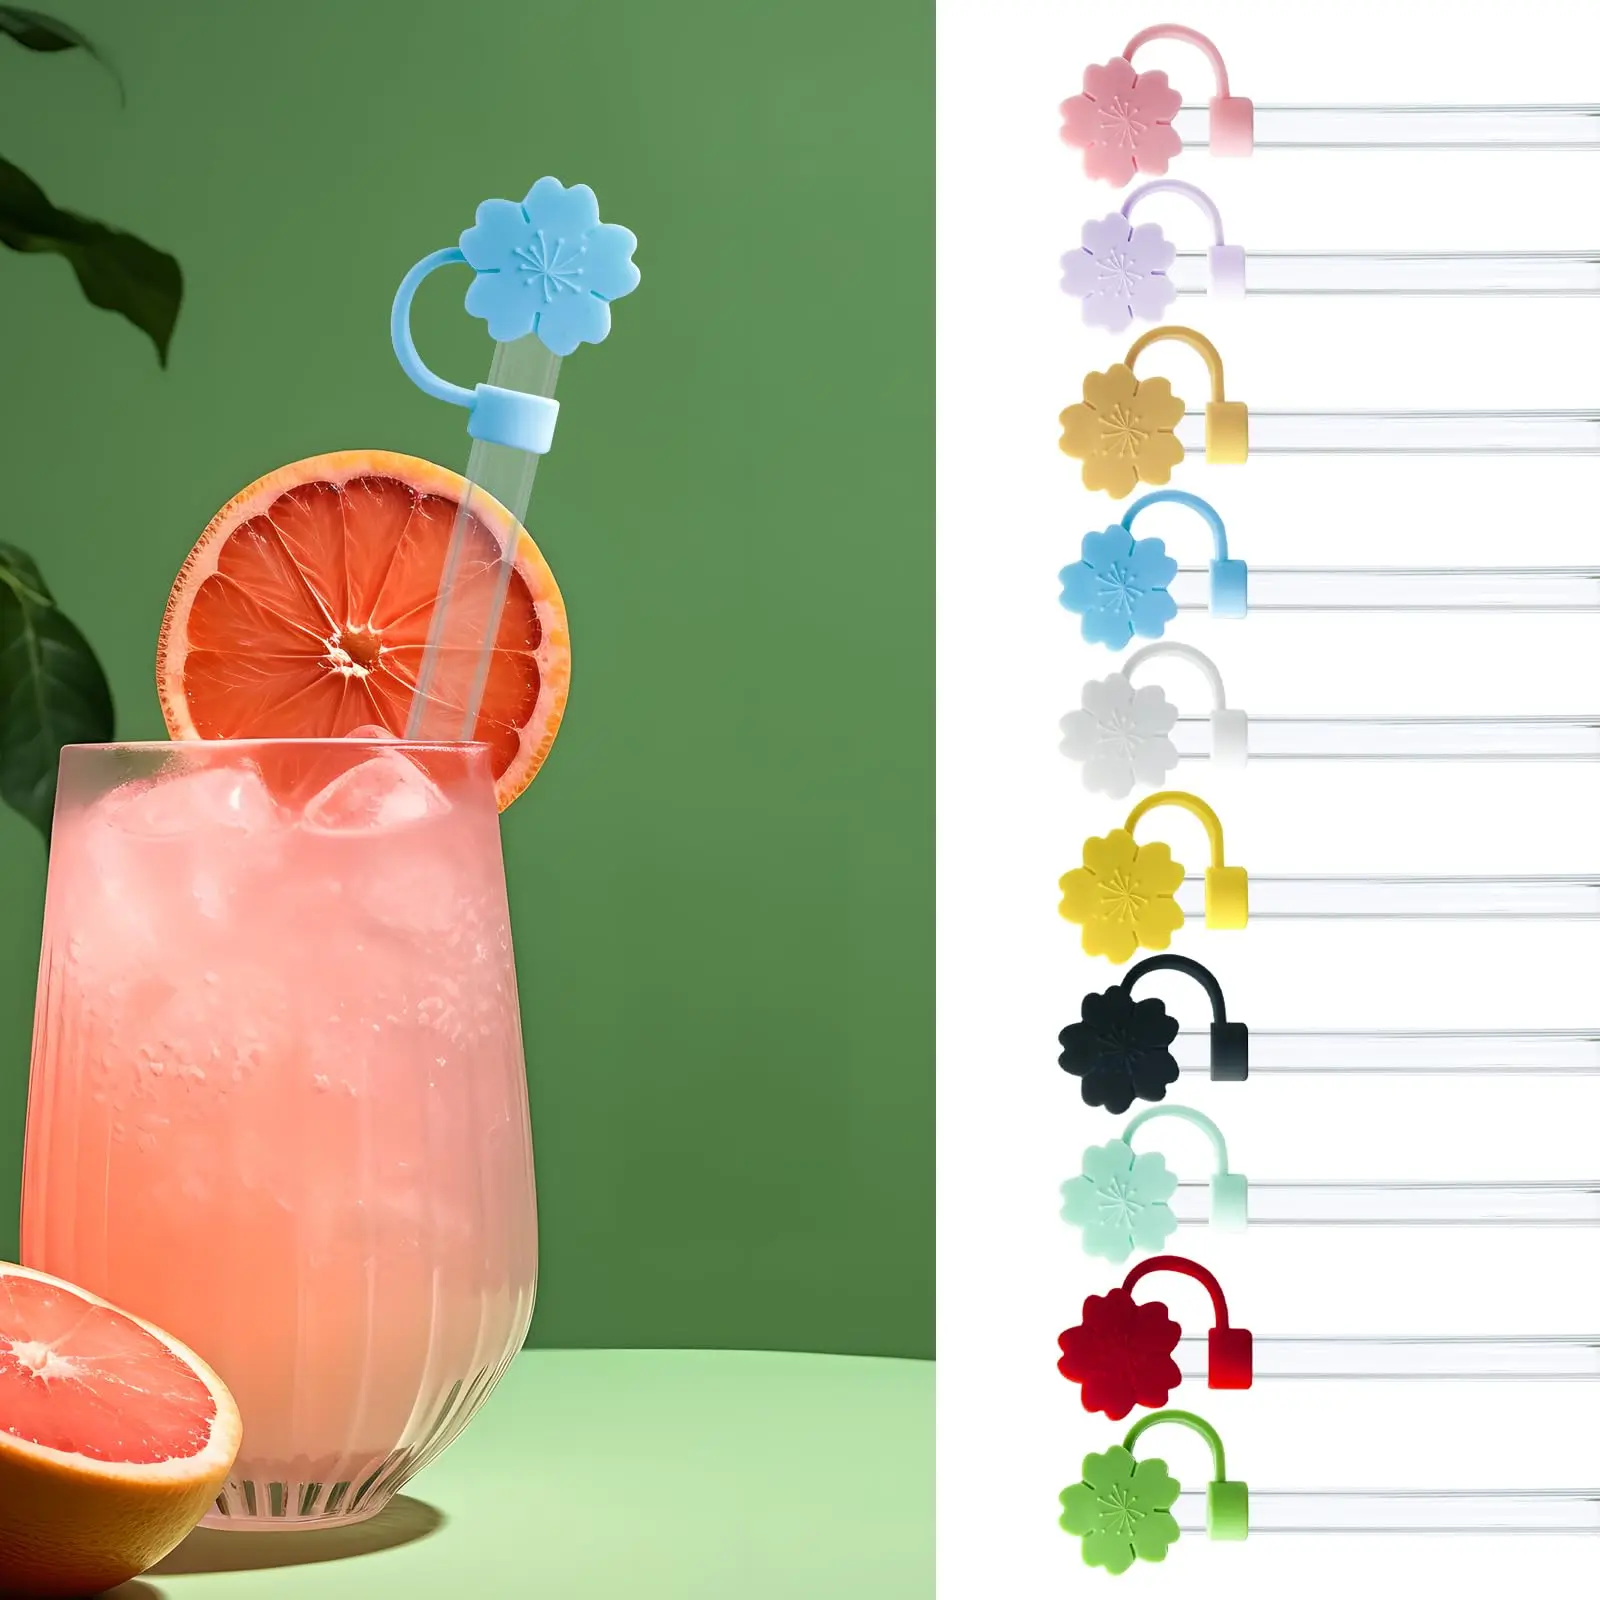 https://ae01.alicdn.com/kf/S445787dcb0c547c1ab3488b6b81c2abd4/10PCS-Silicone-Straw-Covers-Cap-Compatible-with-Stanley-30-40-Oz-Cup-10mm-Cute-Flower-Straw.jpg